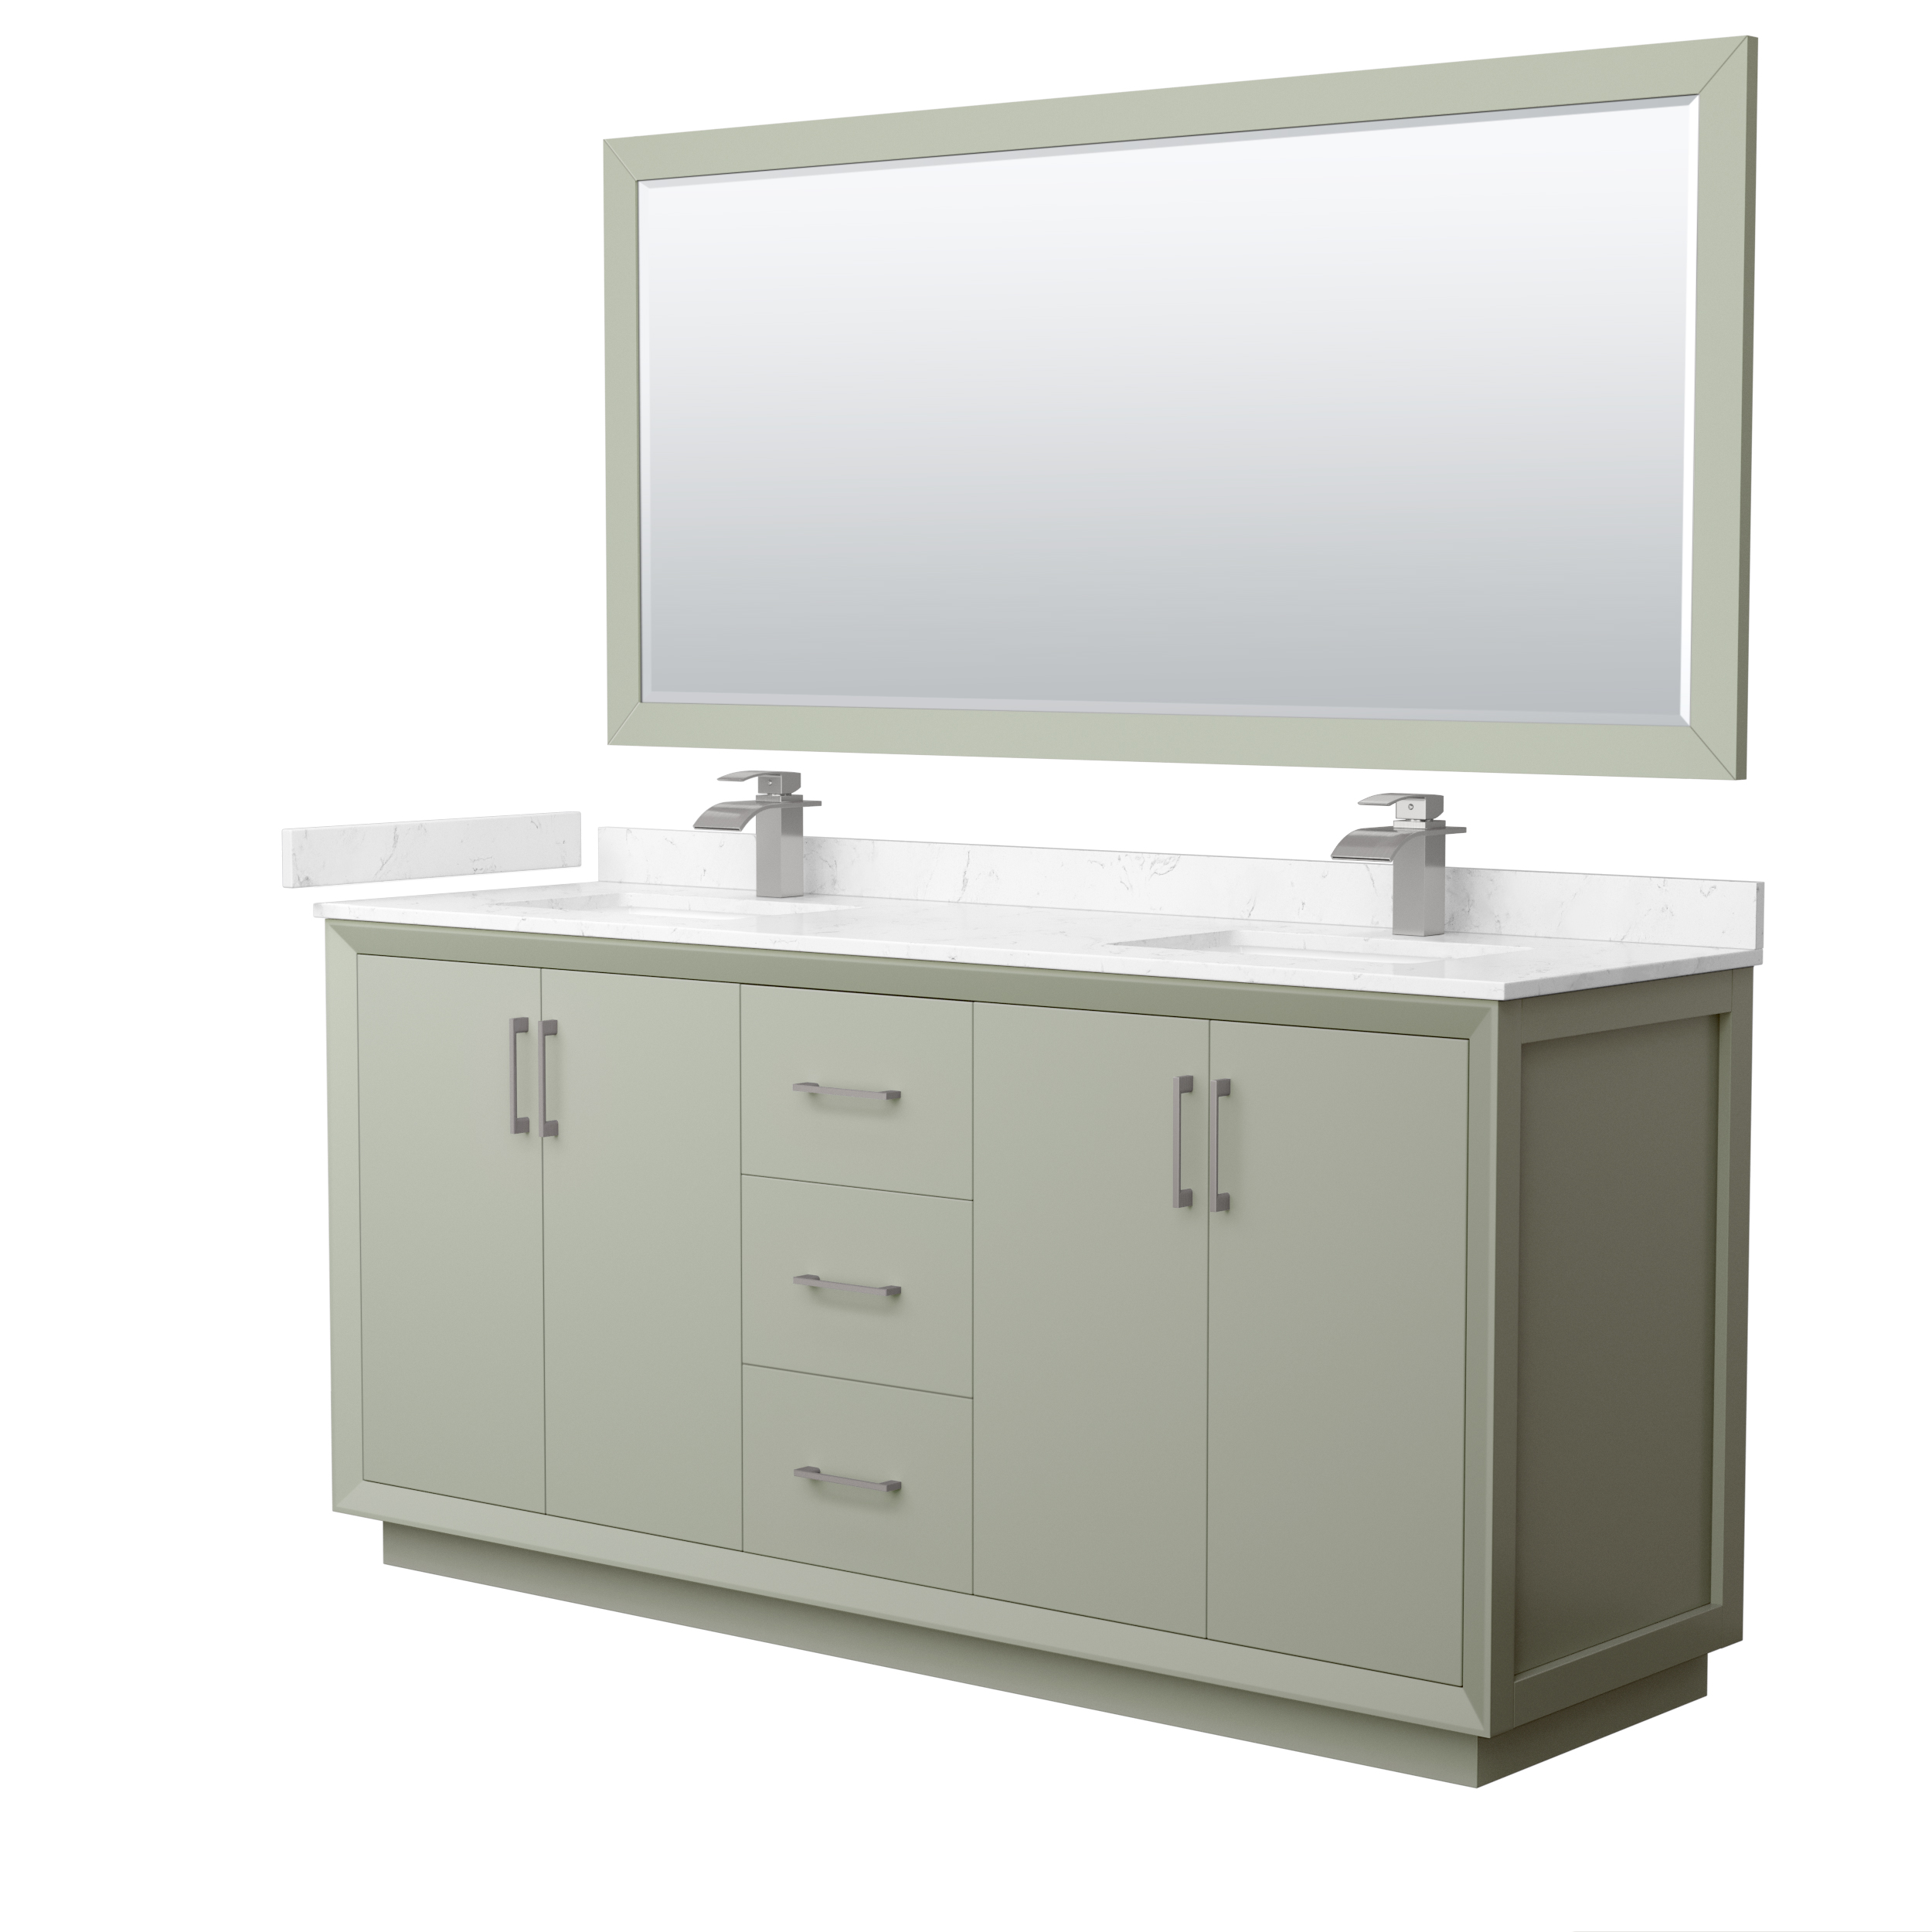 Strada 72" Double Vanity with optional Cultured Marble Counter - Light Green WC-4141-72-DBL-VAN-LGN-